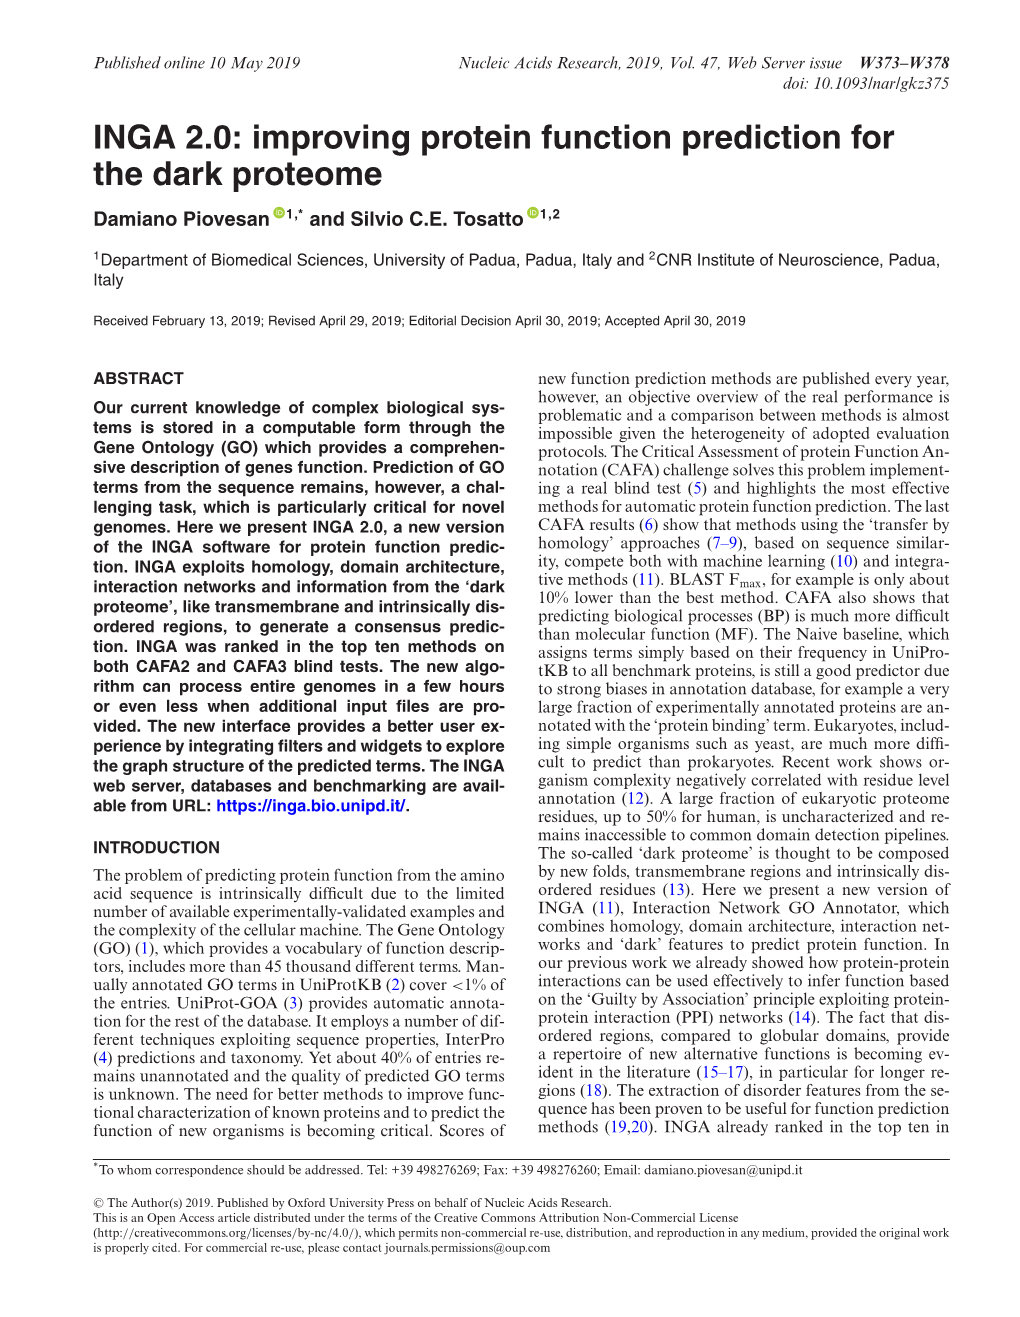 INGA 2.0: Improving Protein Function Prediction for the Dark Proteome